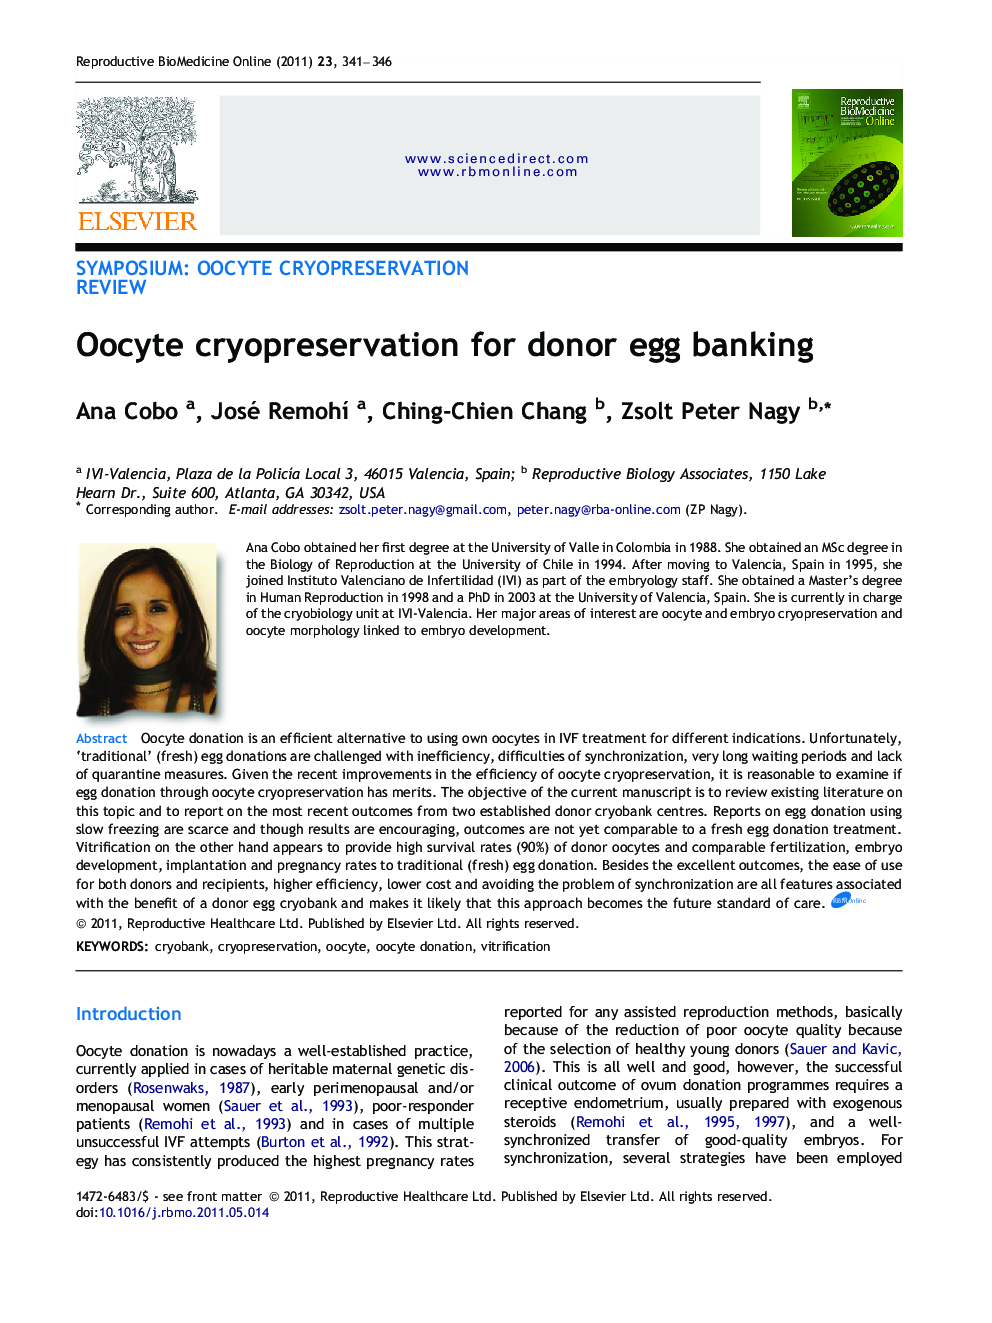 Oocyte cryopreservation for donor egg banking 